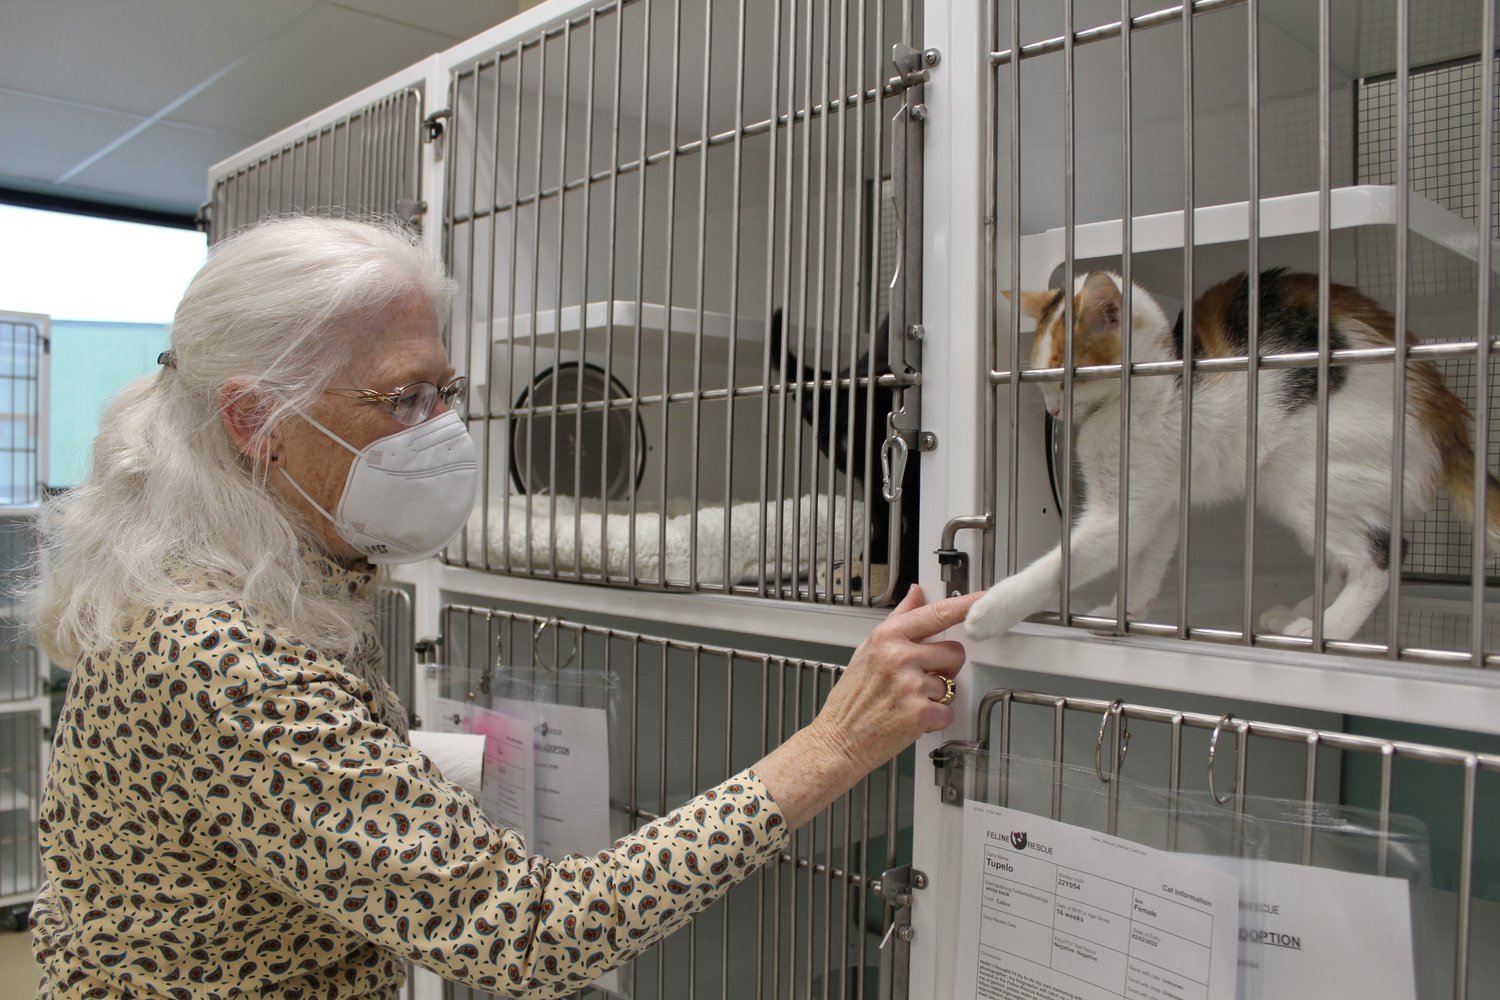 Volunteer Gail Frethem plays with Tupelo at the Feline Rescue shelter, located at 593 Fairview Ave N. The organization is always lookng for help at its shelter and to foster cats. (Photo by Penny Fuller)